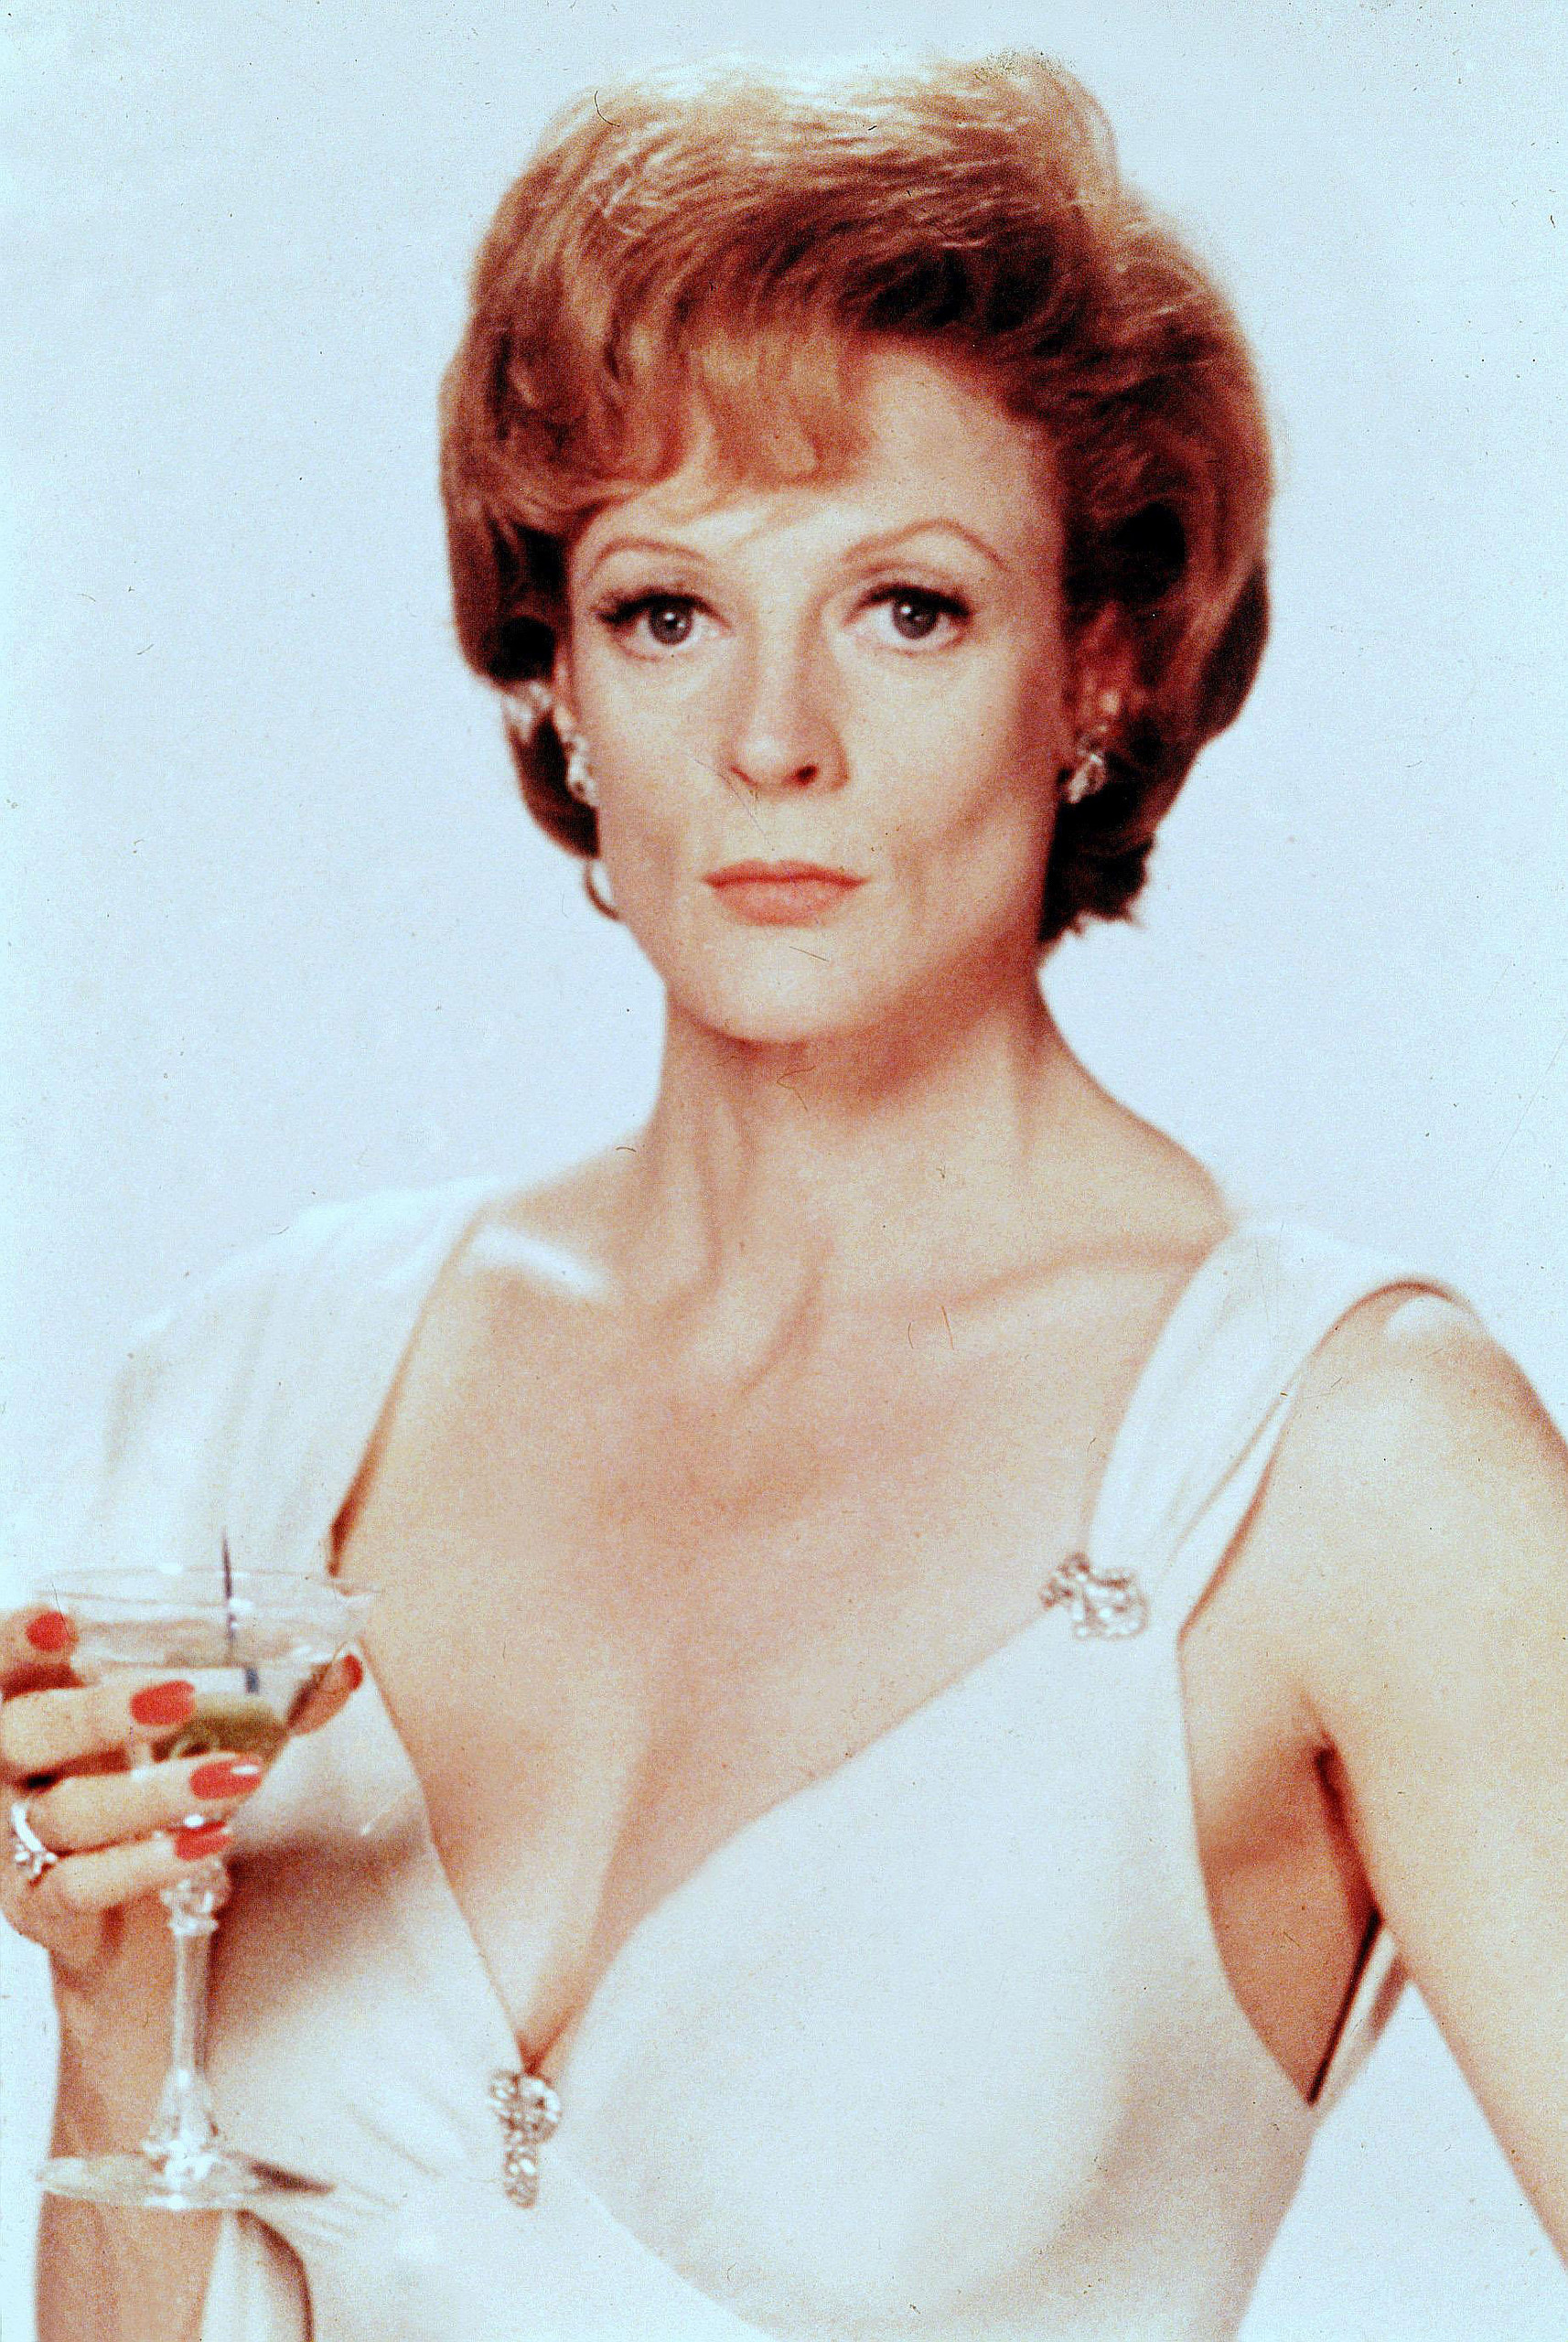 Nudes maggie smith leaked Maggie Smith